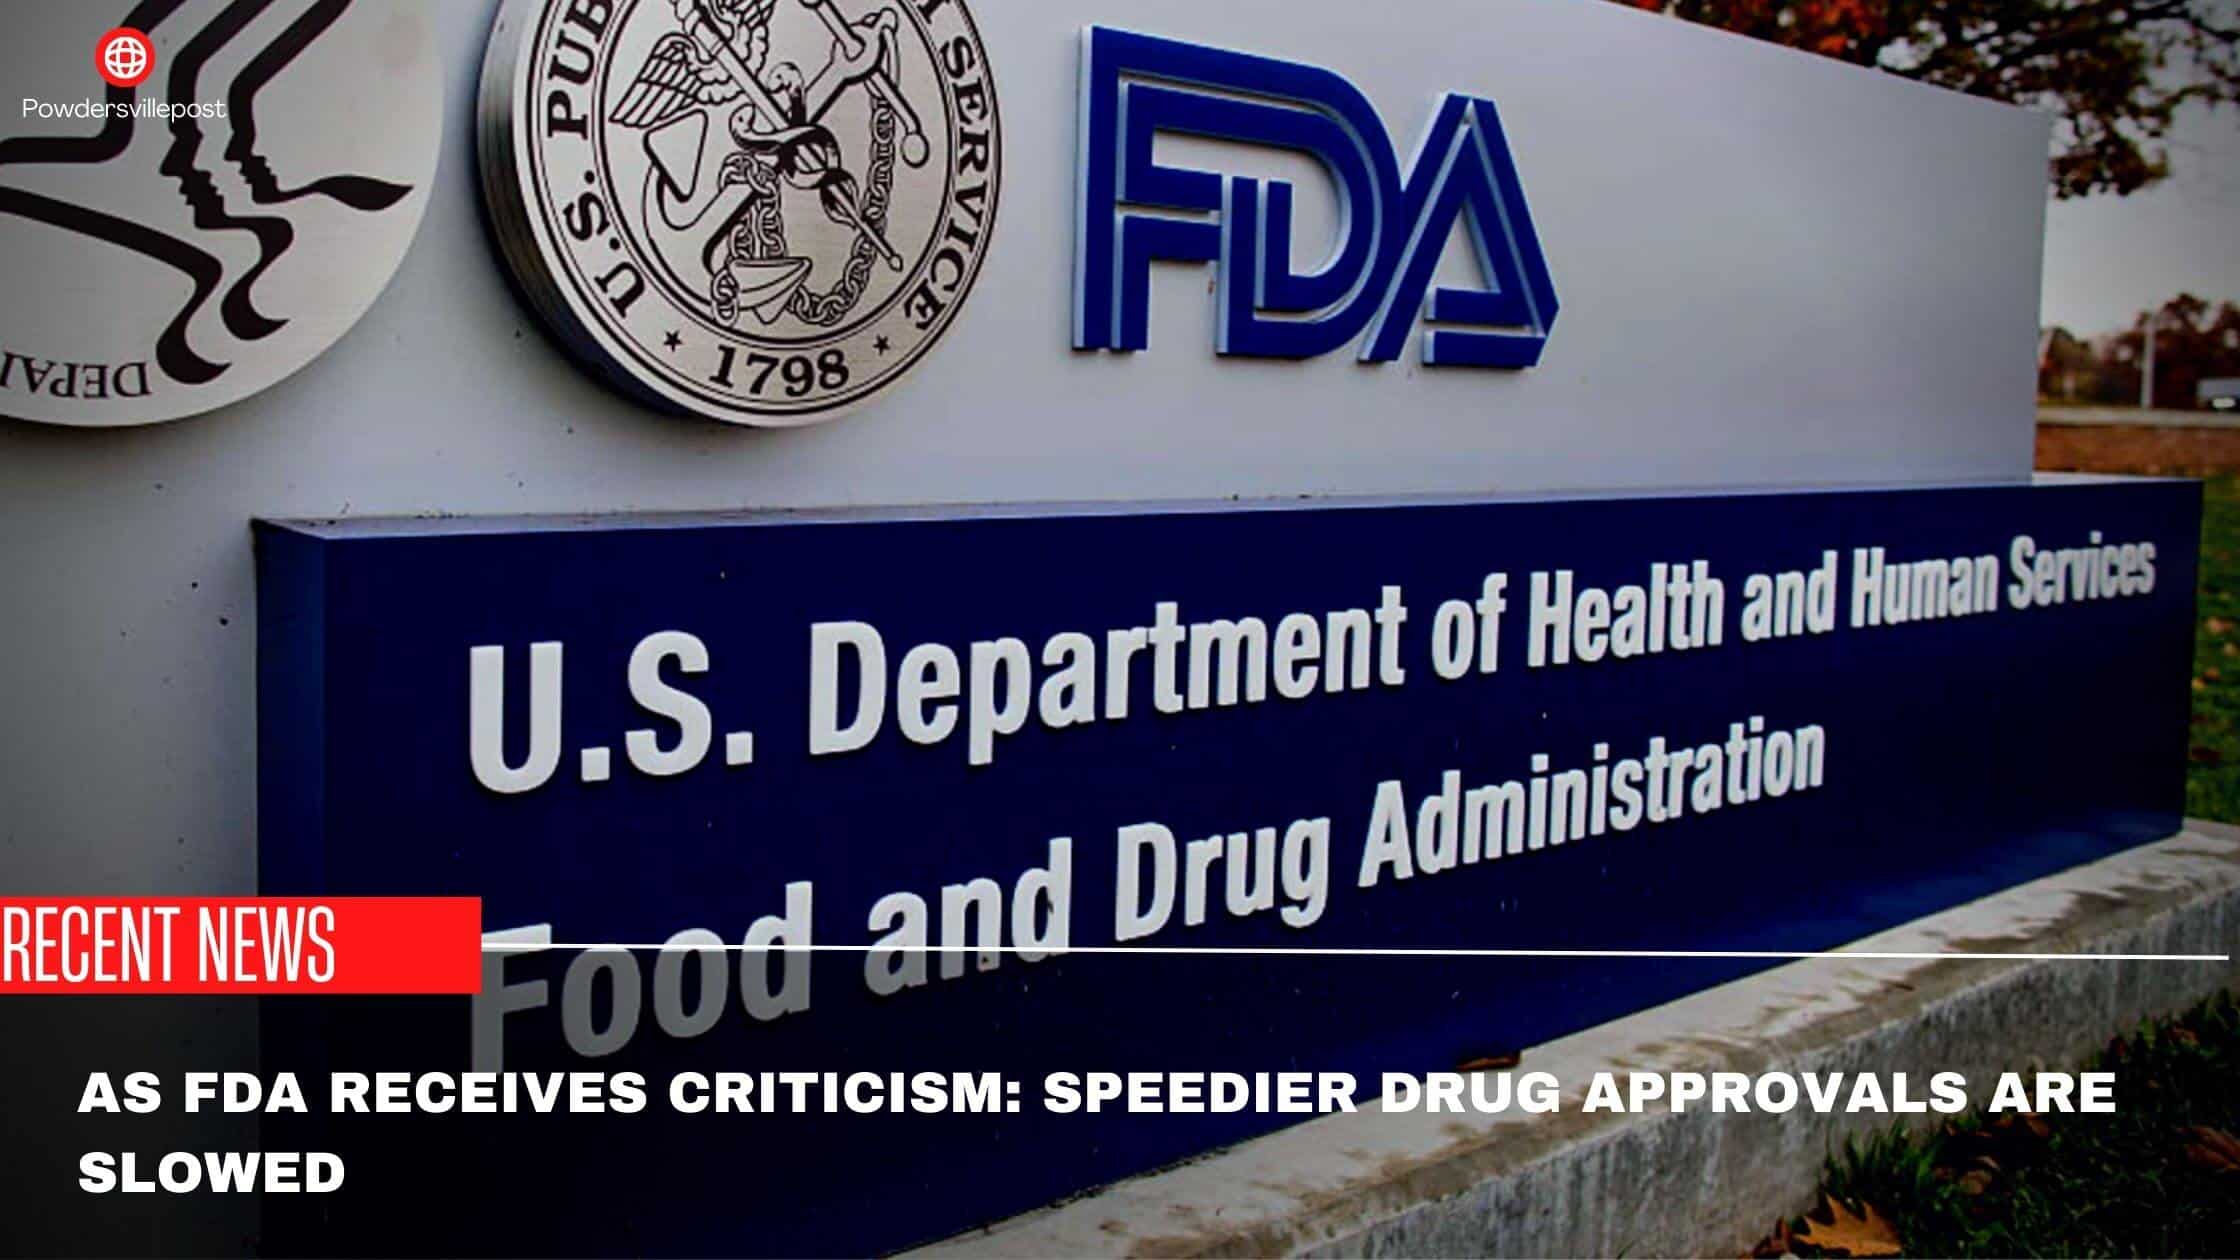 As FDA Receives Criticism Speedier Drug Approvals Are Slowed